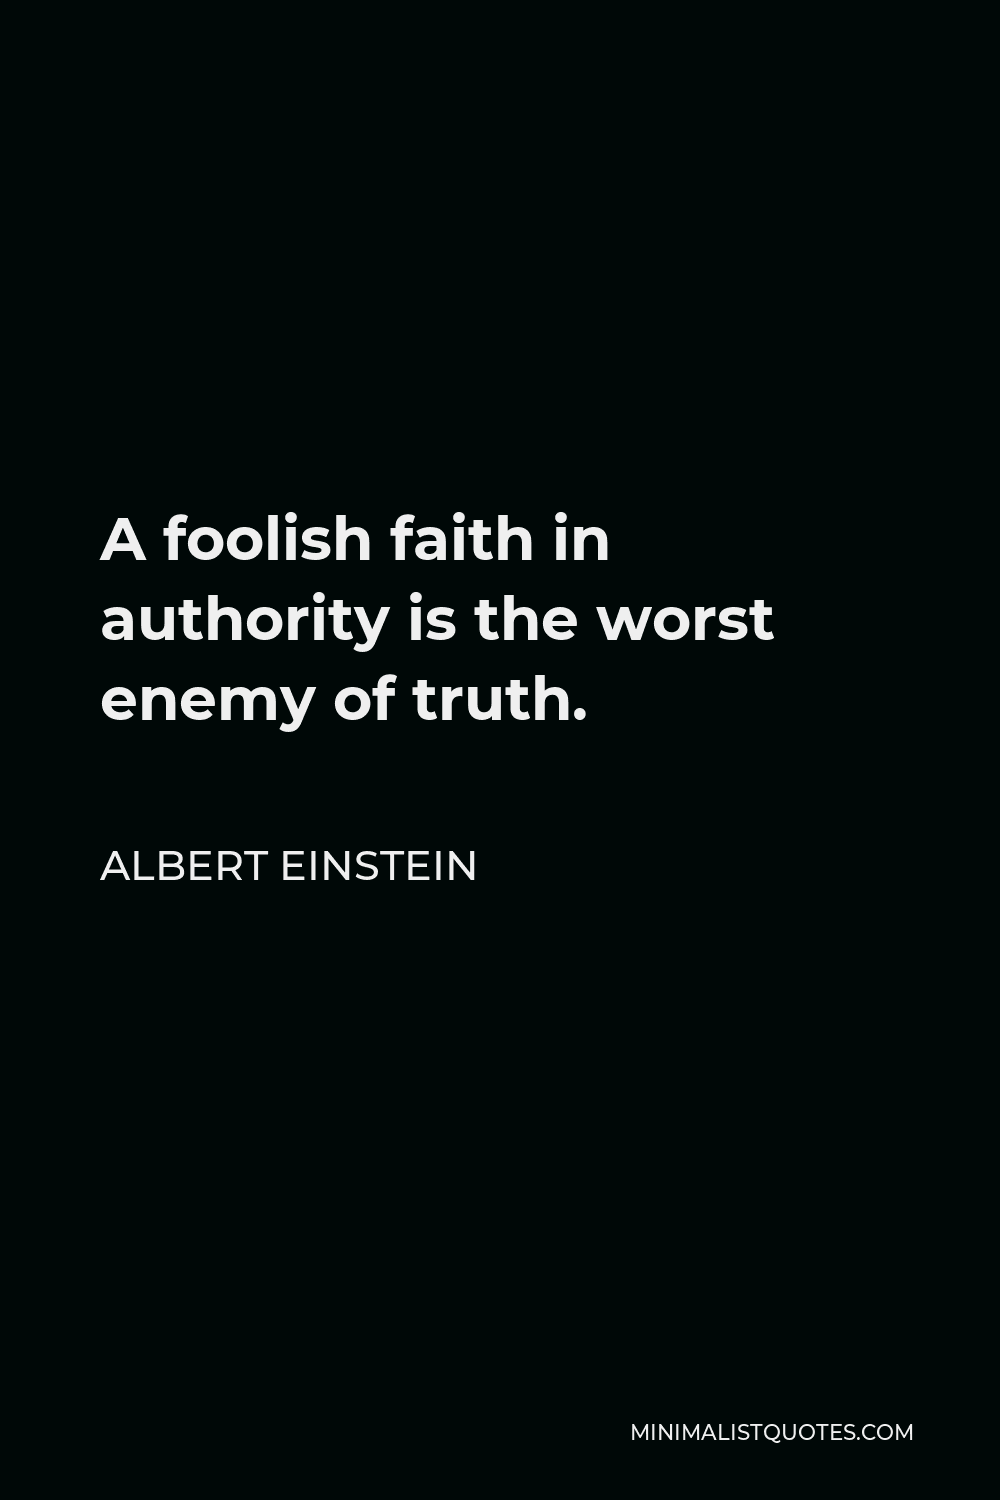 Albert Einstein Quote - A foolish faith in authority is the worst enemy of truth.